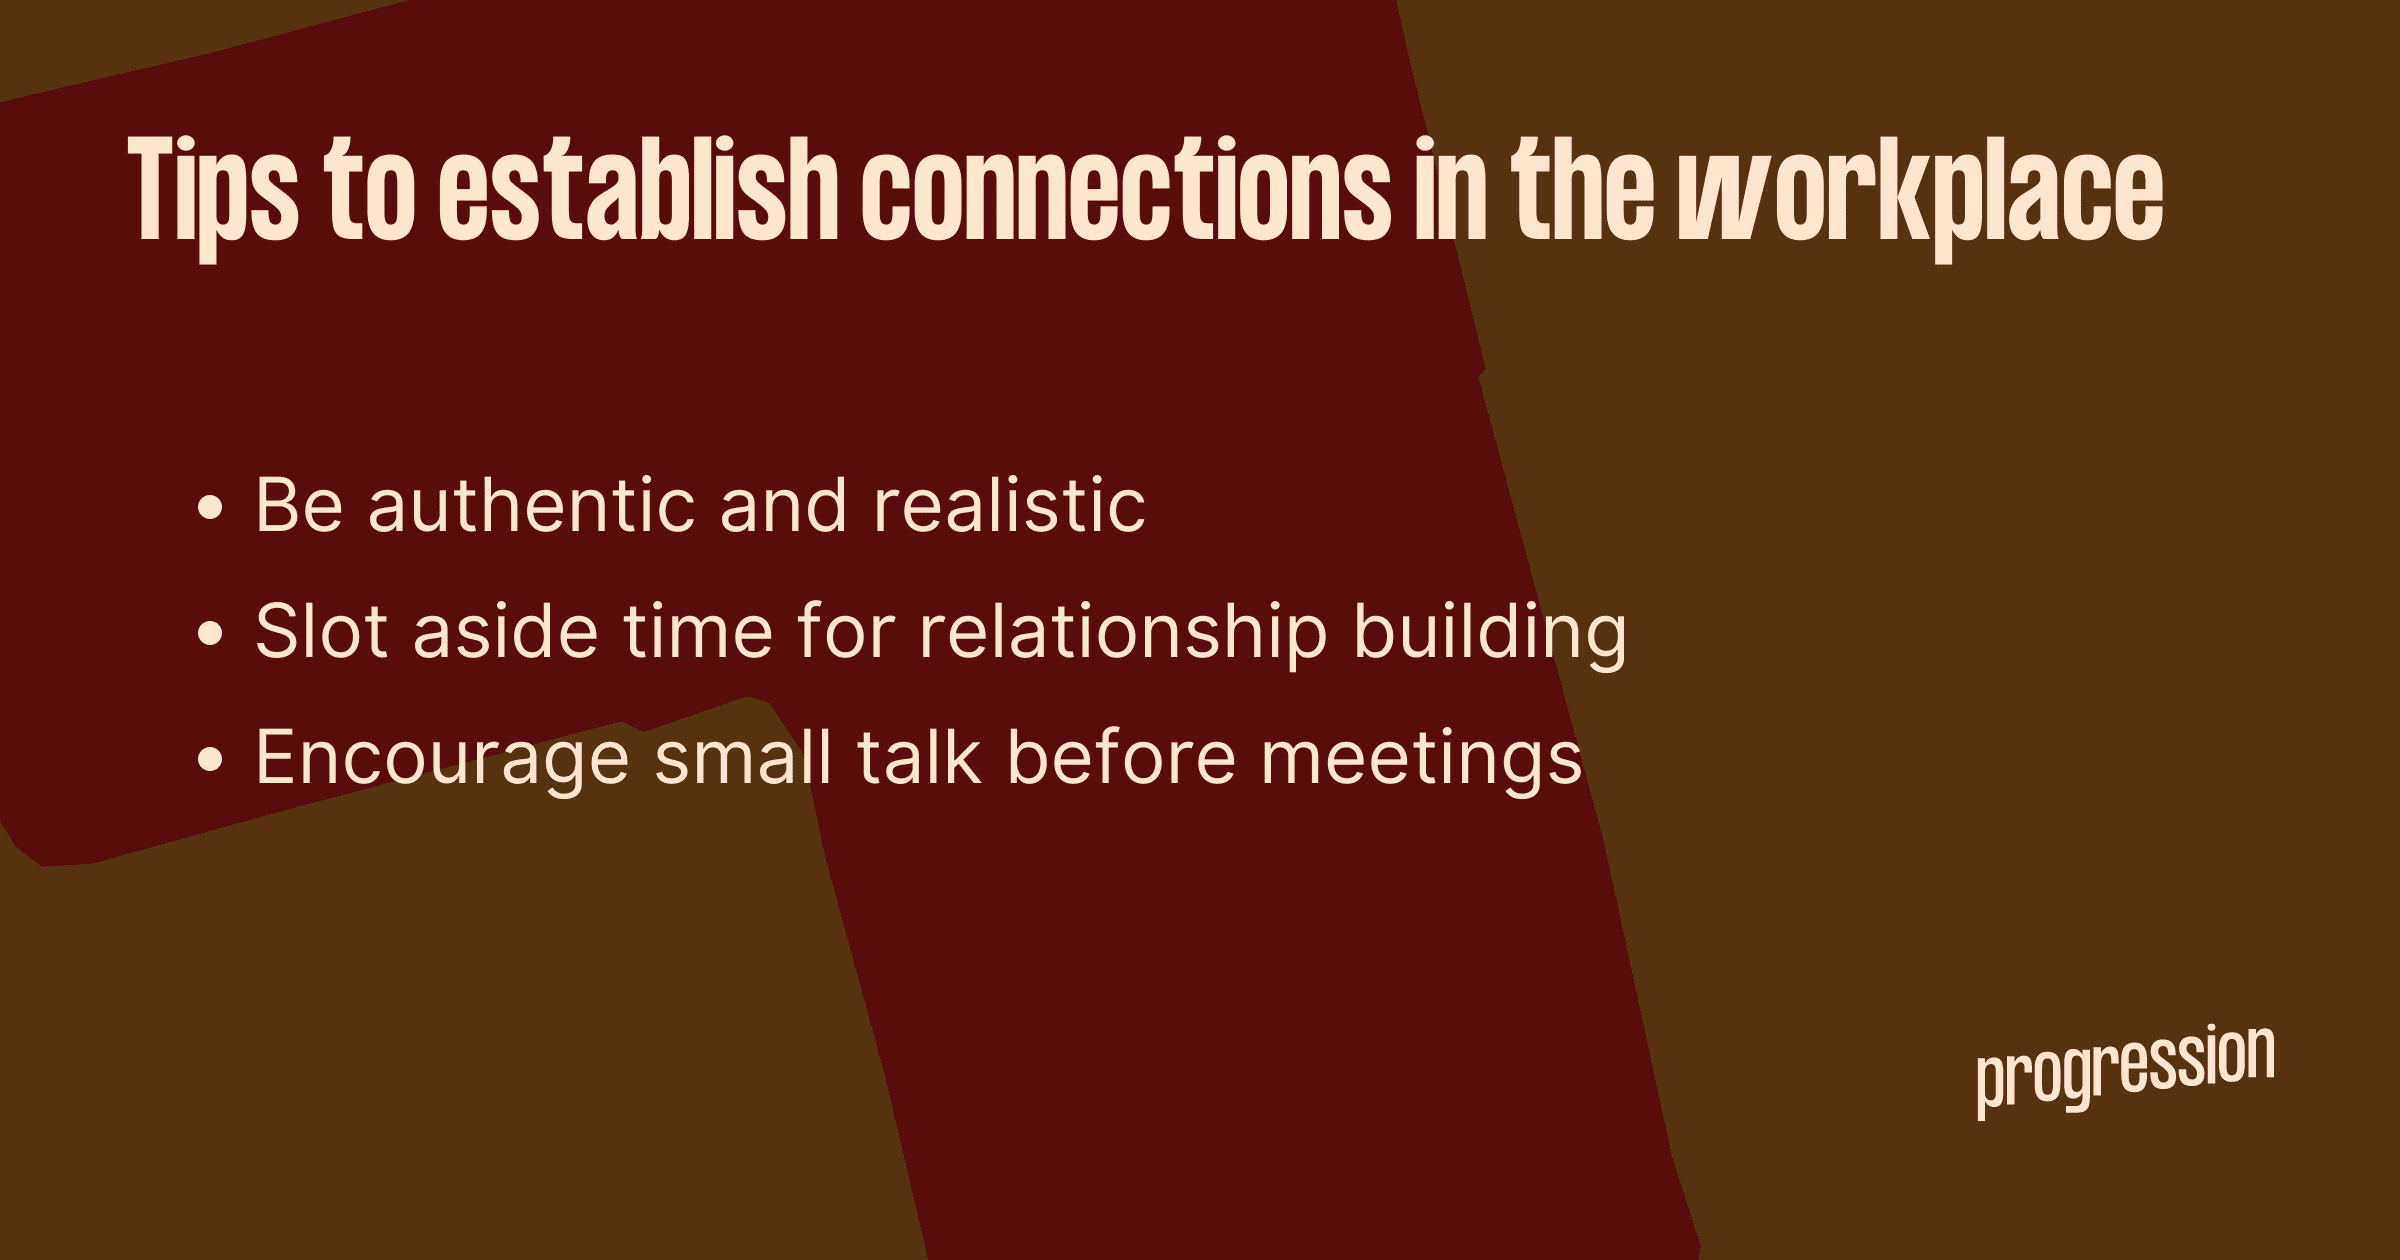 Graphic highlighting tips to establish connections in the workplace